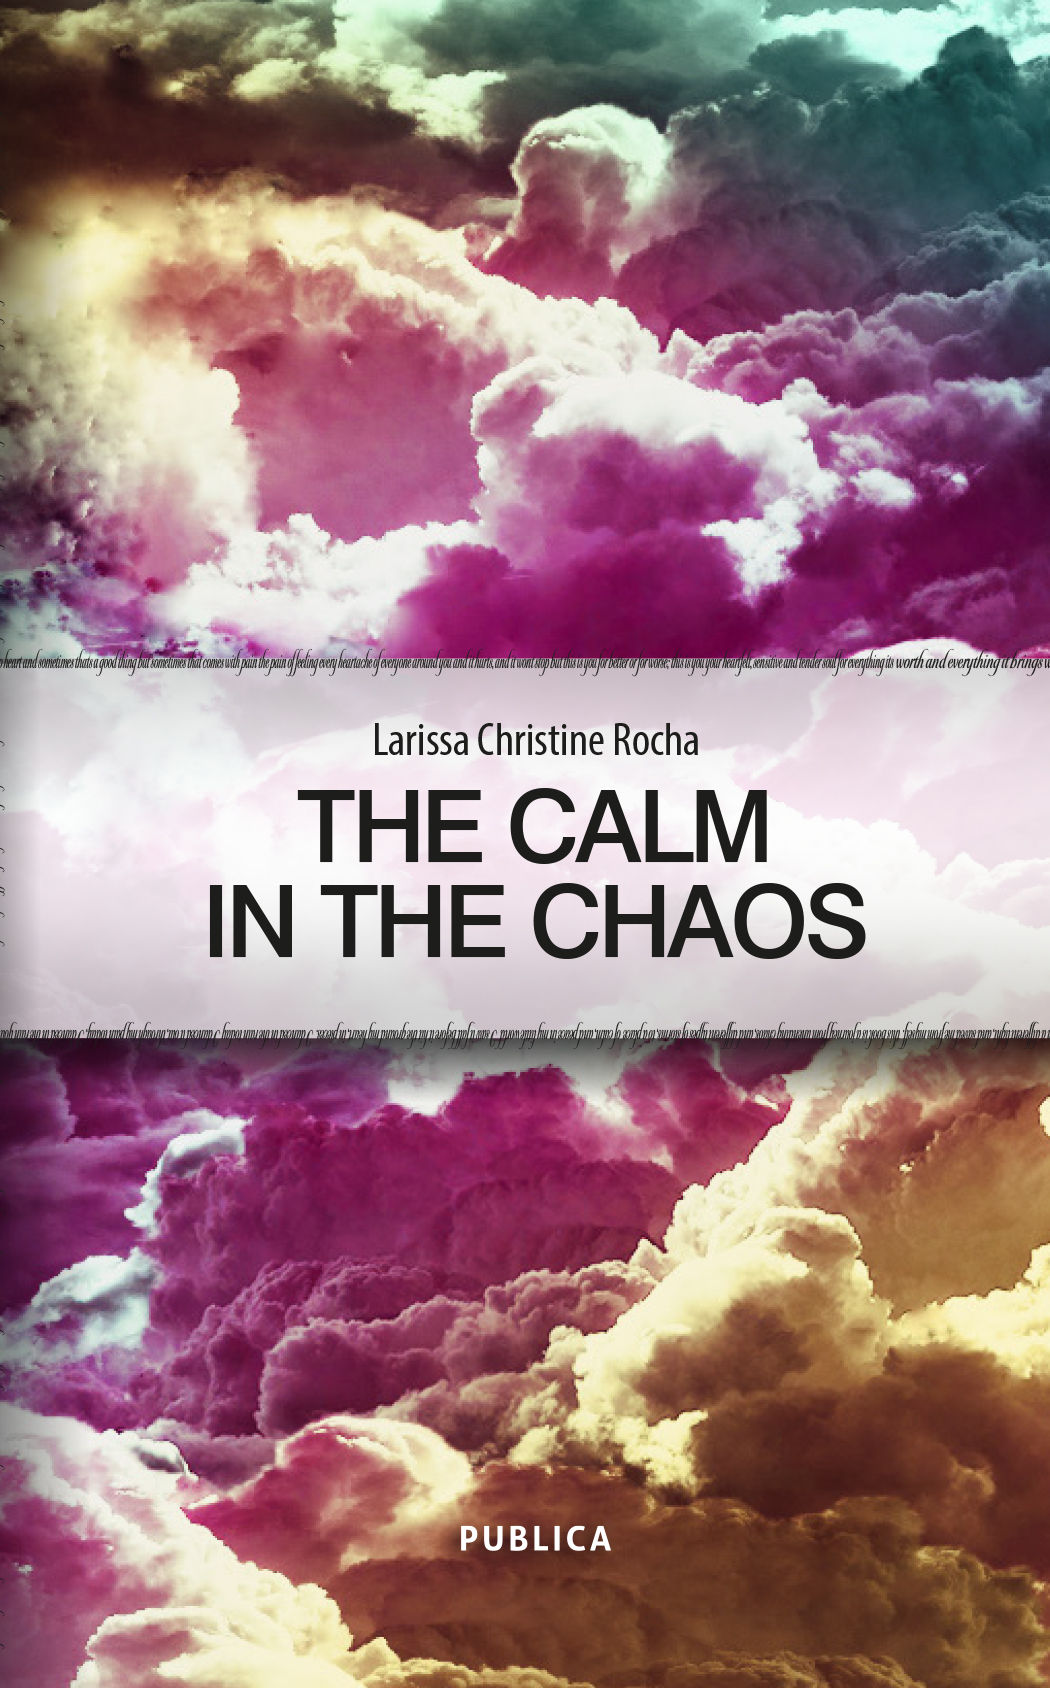 "The calm in the chaos"